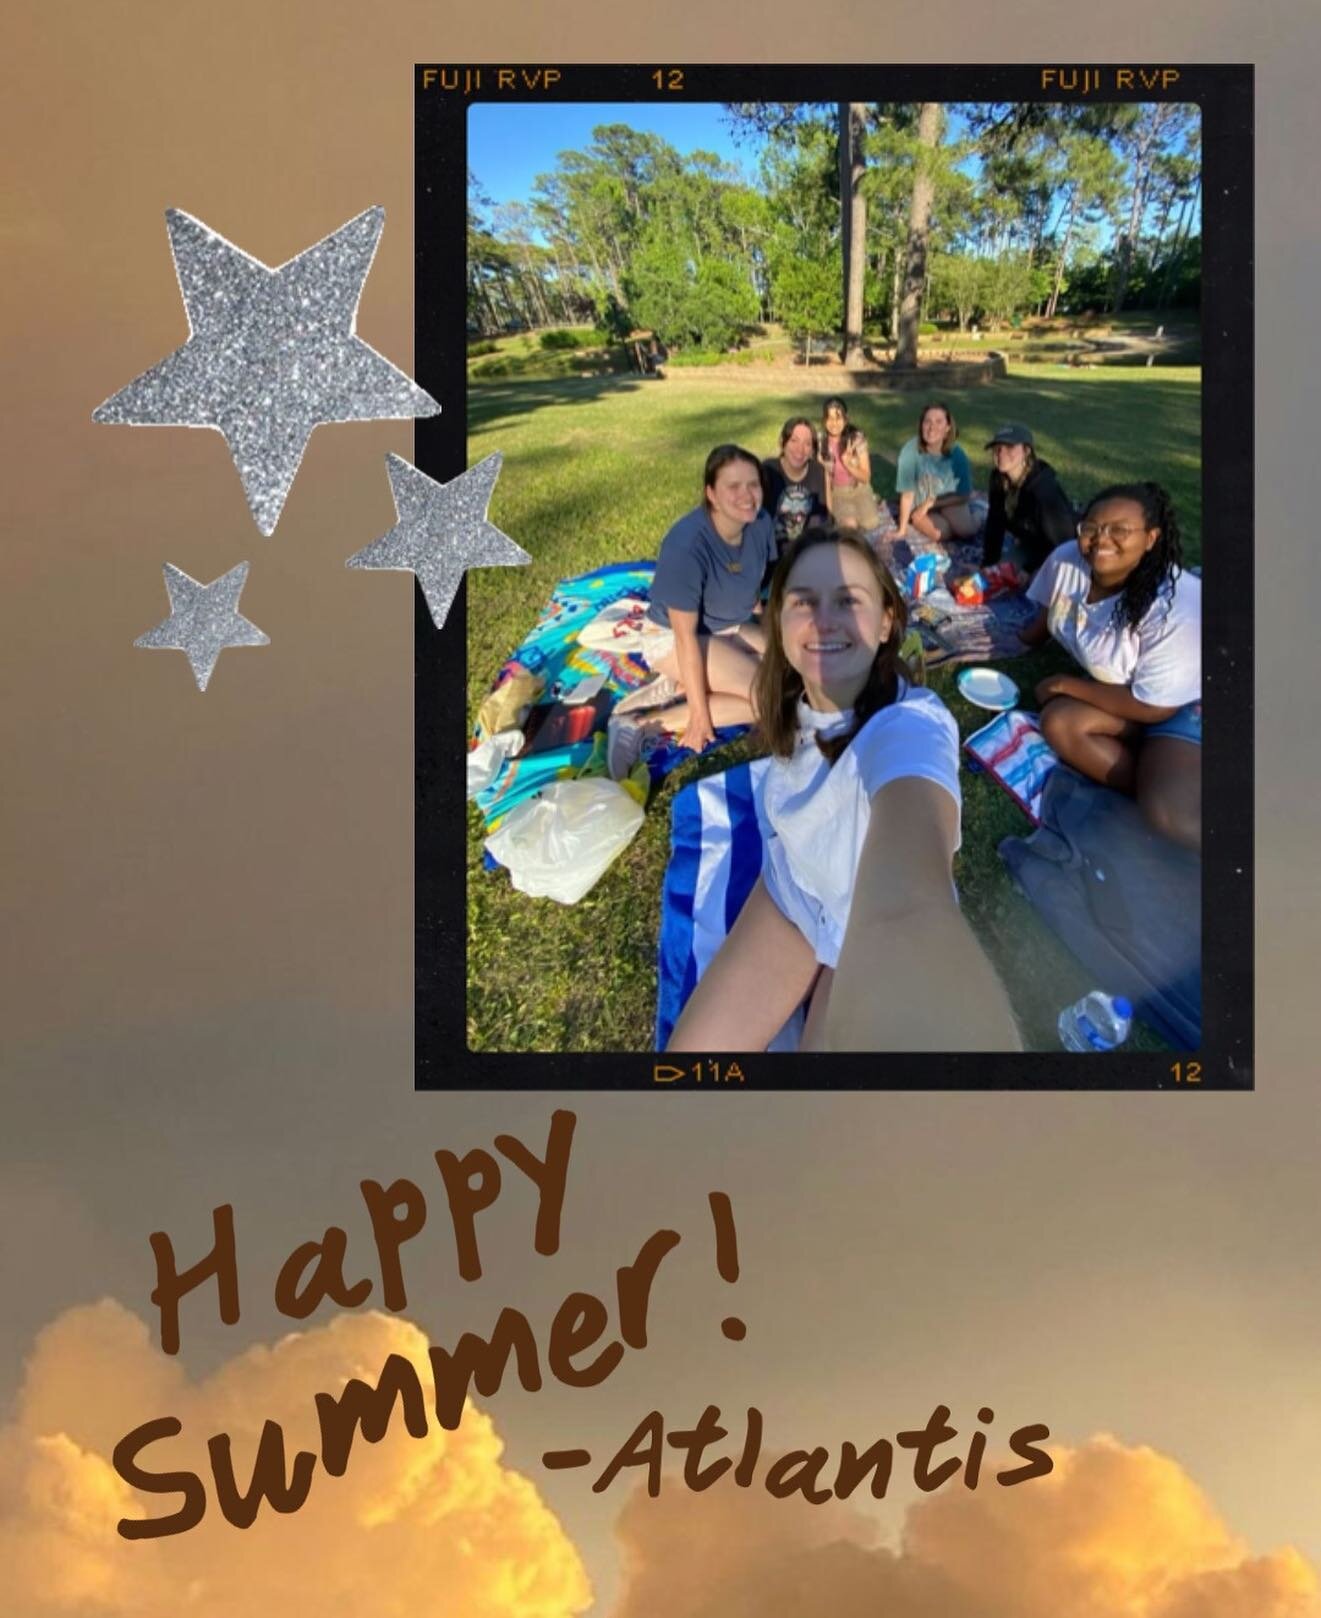 Happy Summer from the Atlantis staff to you! We&rsquo;ve had such an amazing year and we are so grateful for everyone who has worked with us. We wish you all a happy, healthy summer!